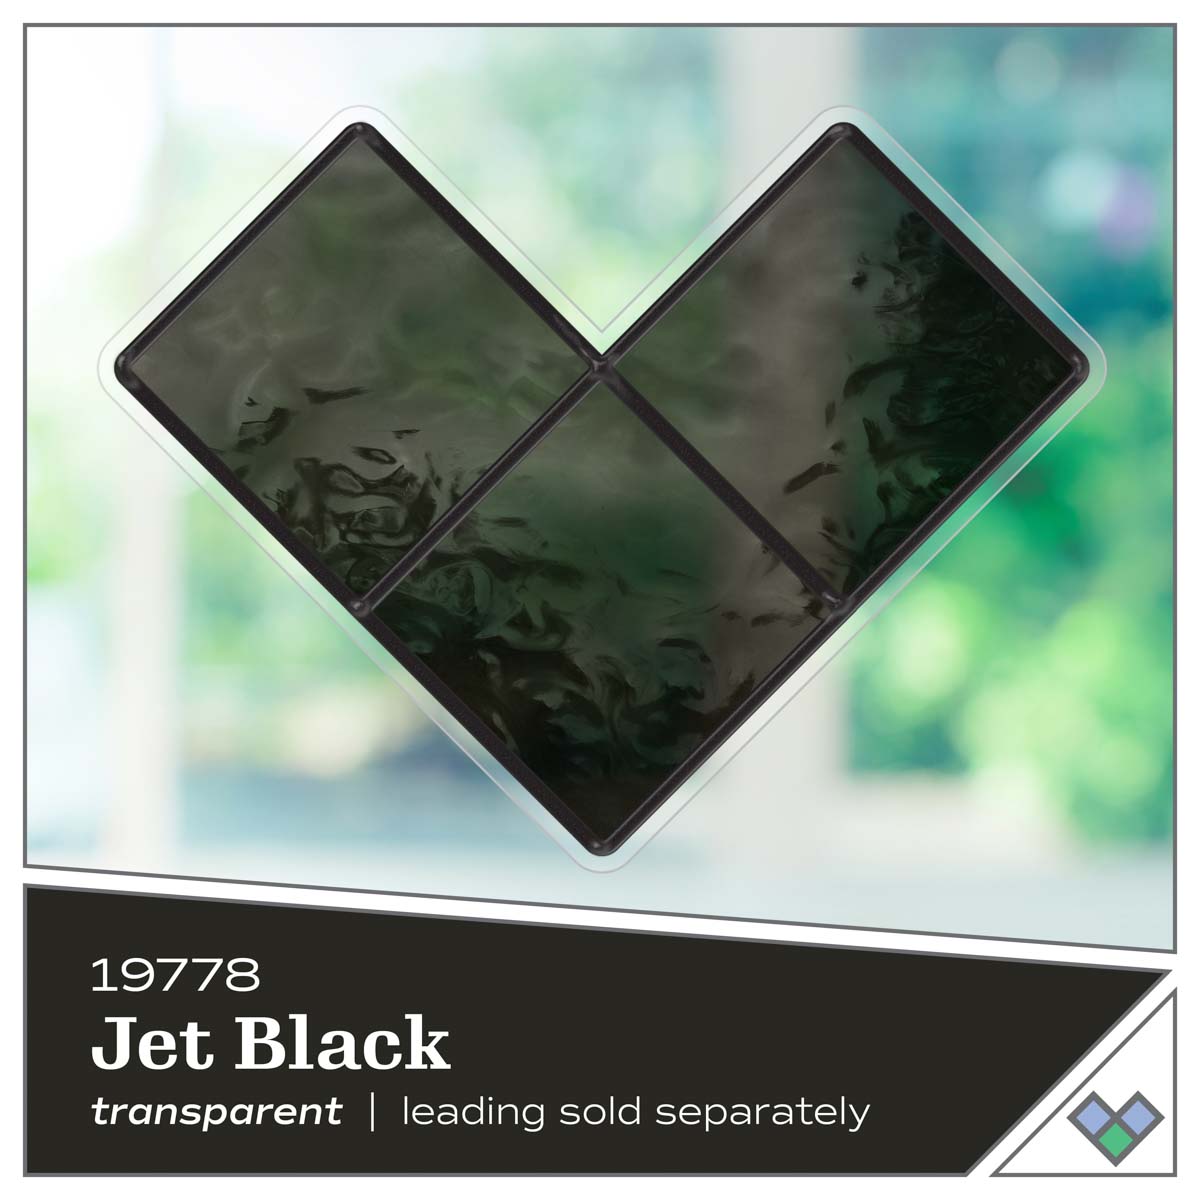 Gallery Glass ® Stained Glass Effect Paint - Jet Black, 2 oz. - 19778